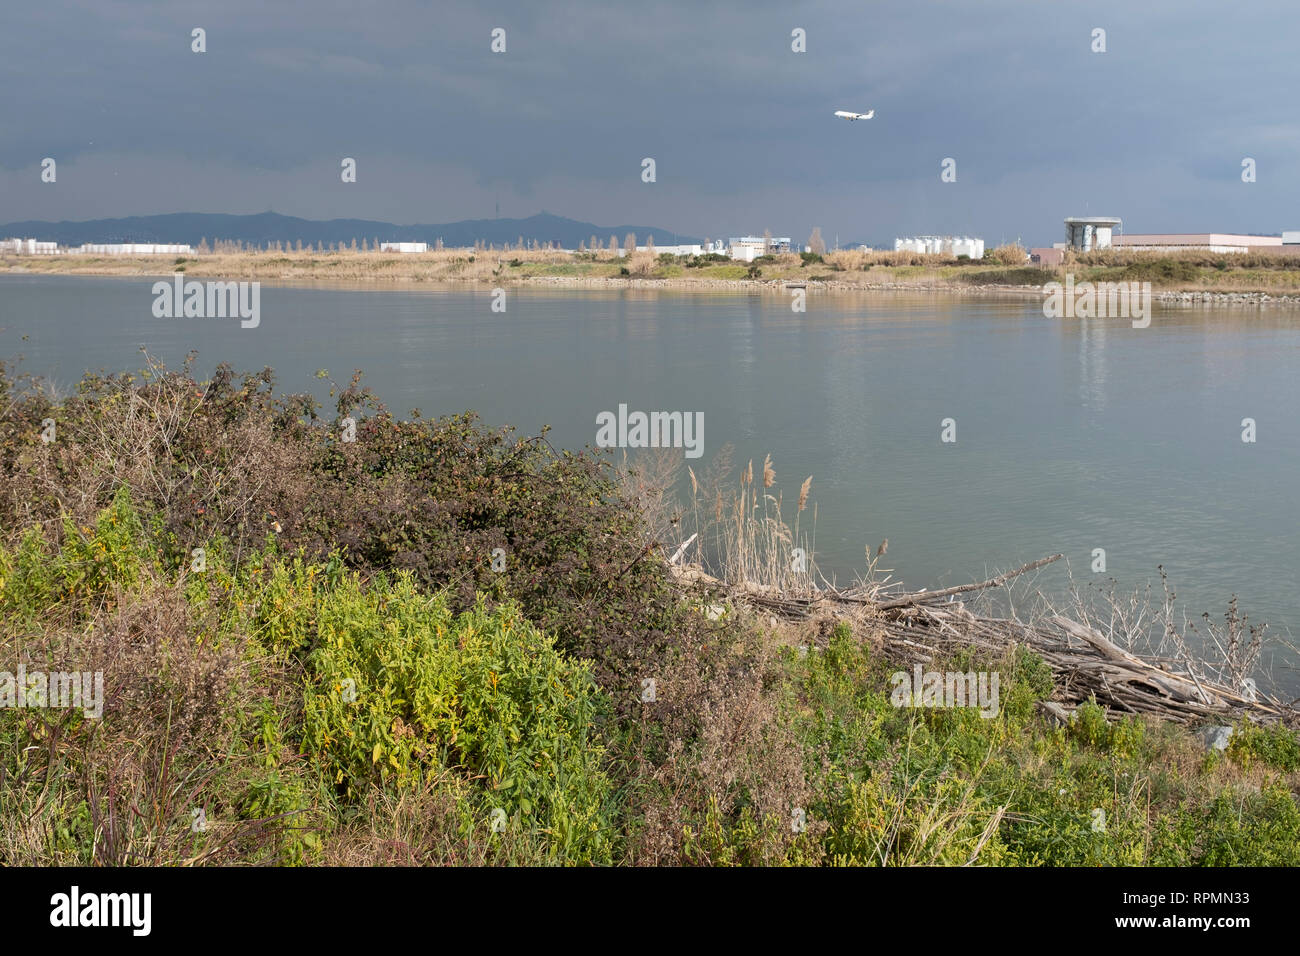 Llobregat River with industrial area in background while a plane prepares to land at Barcelona airport. Natural Areas of the Llobregat Delta. Spain. Stock Photo